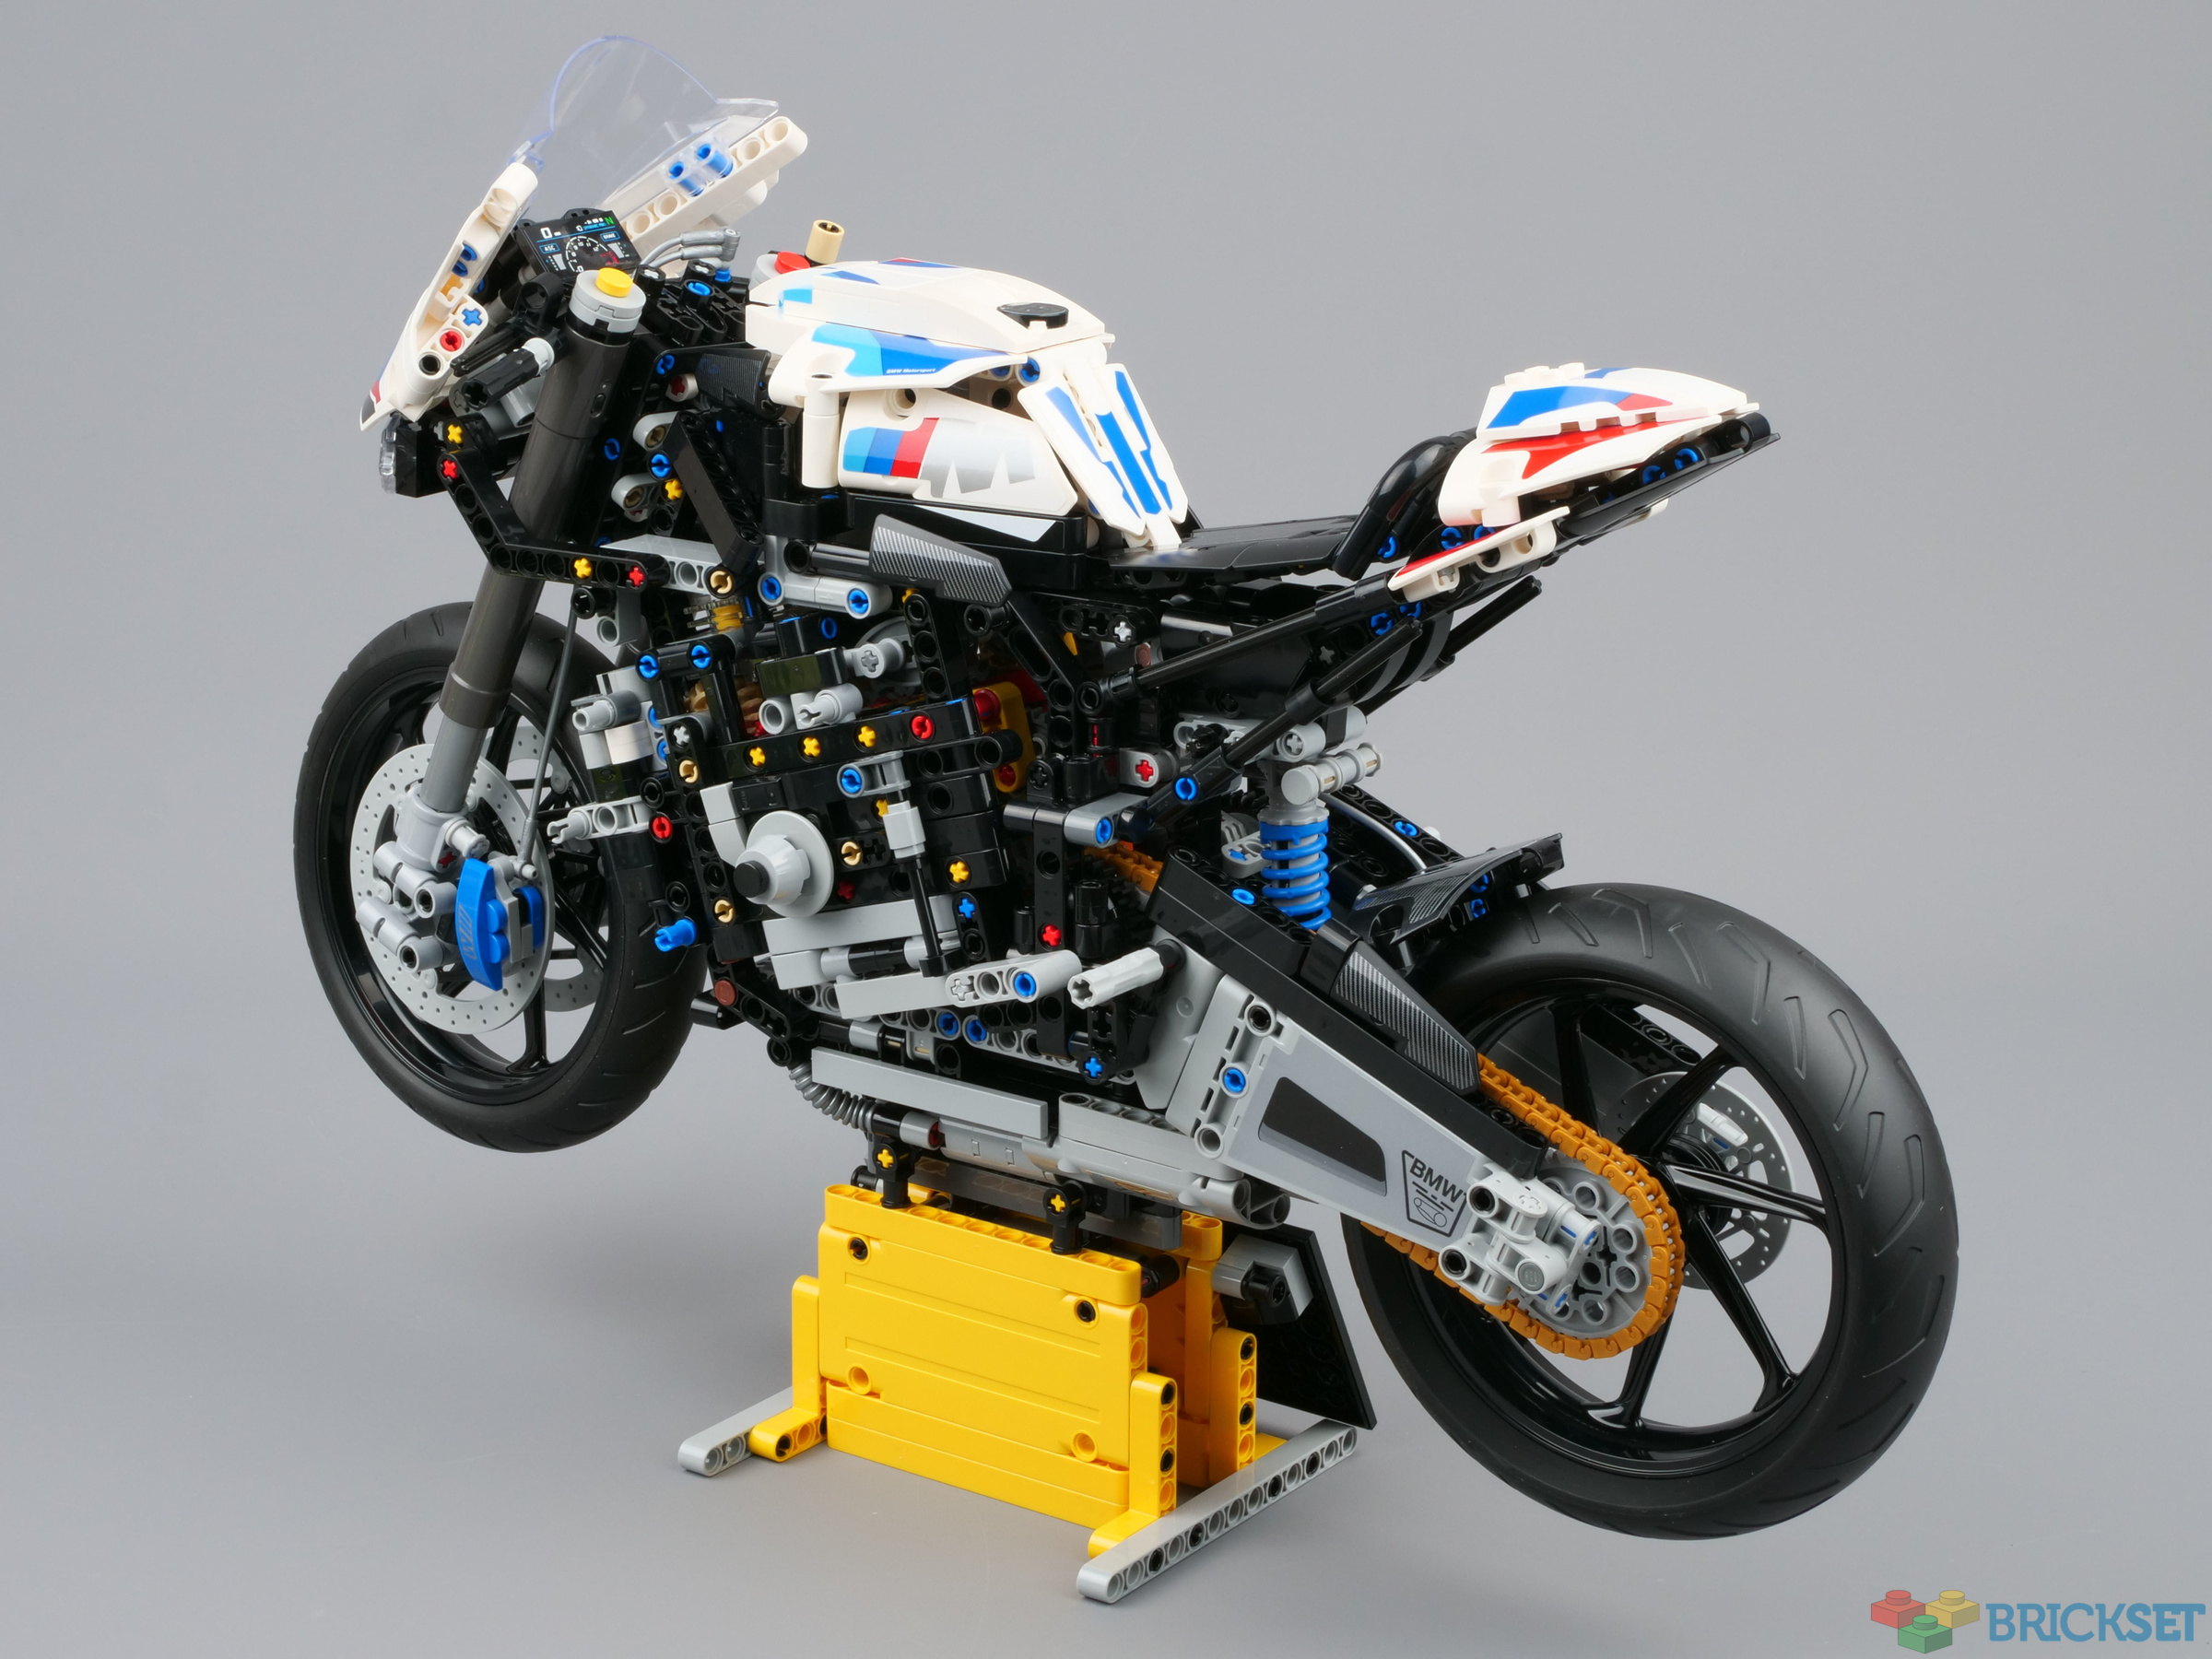 LEGO Technic BMW M 1000 RR K66 - A massive motorcycle for ultimate  collectors! [Review] - The Brothers Brick